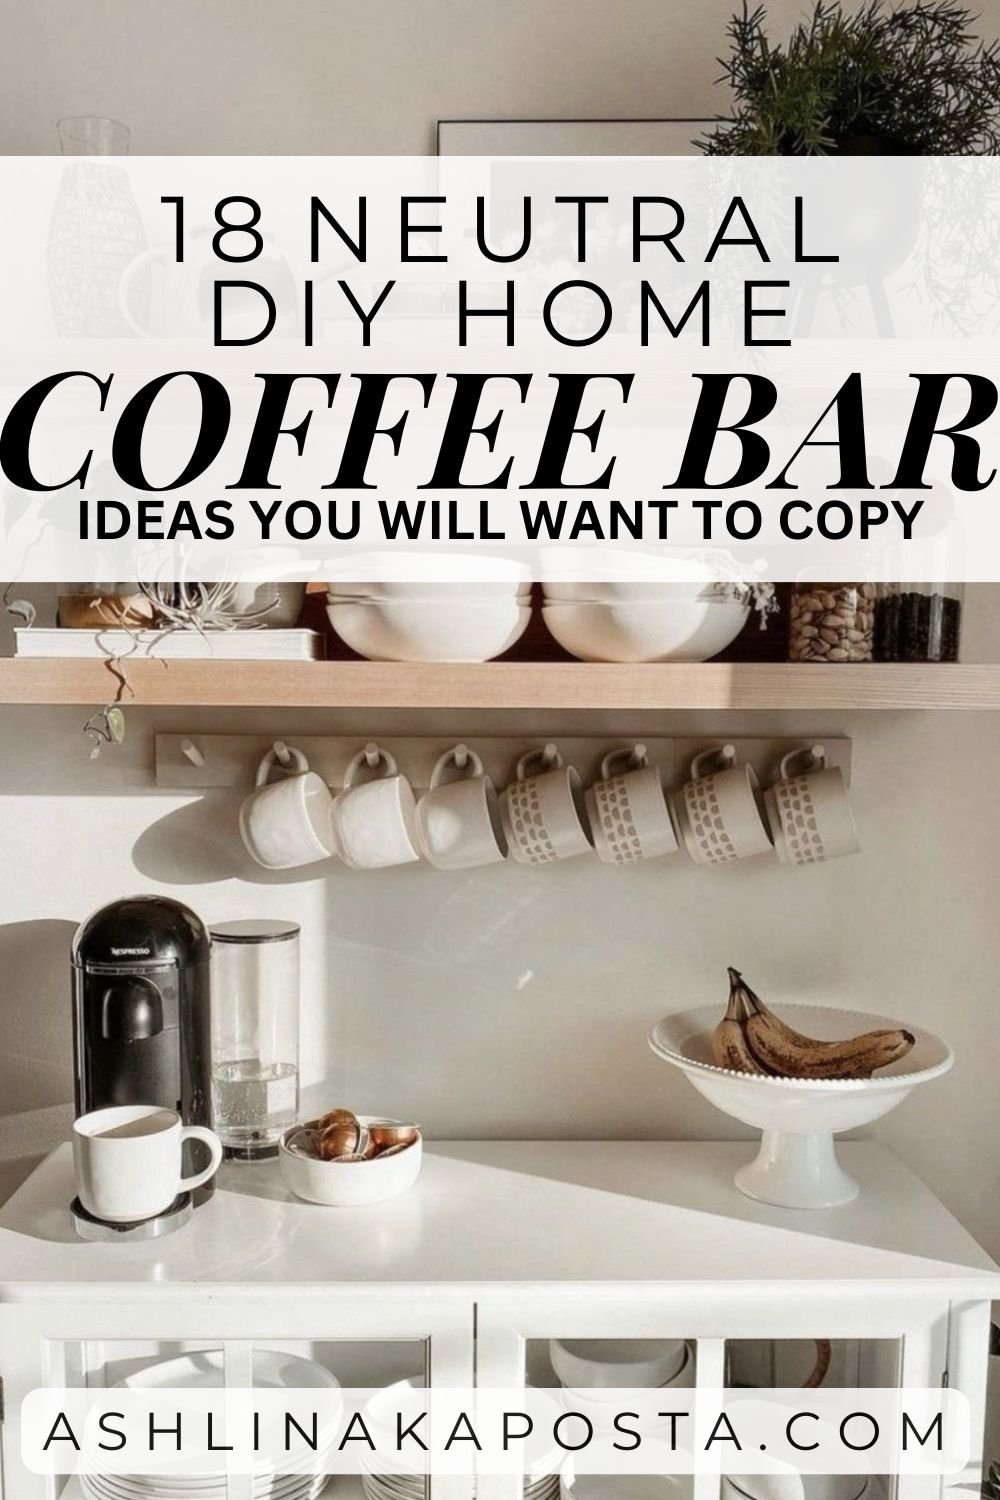 35 DIY Home Coffee Bar Ideas for Small and Large Spaces